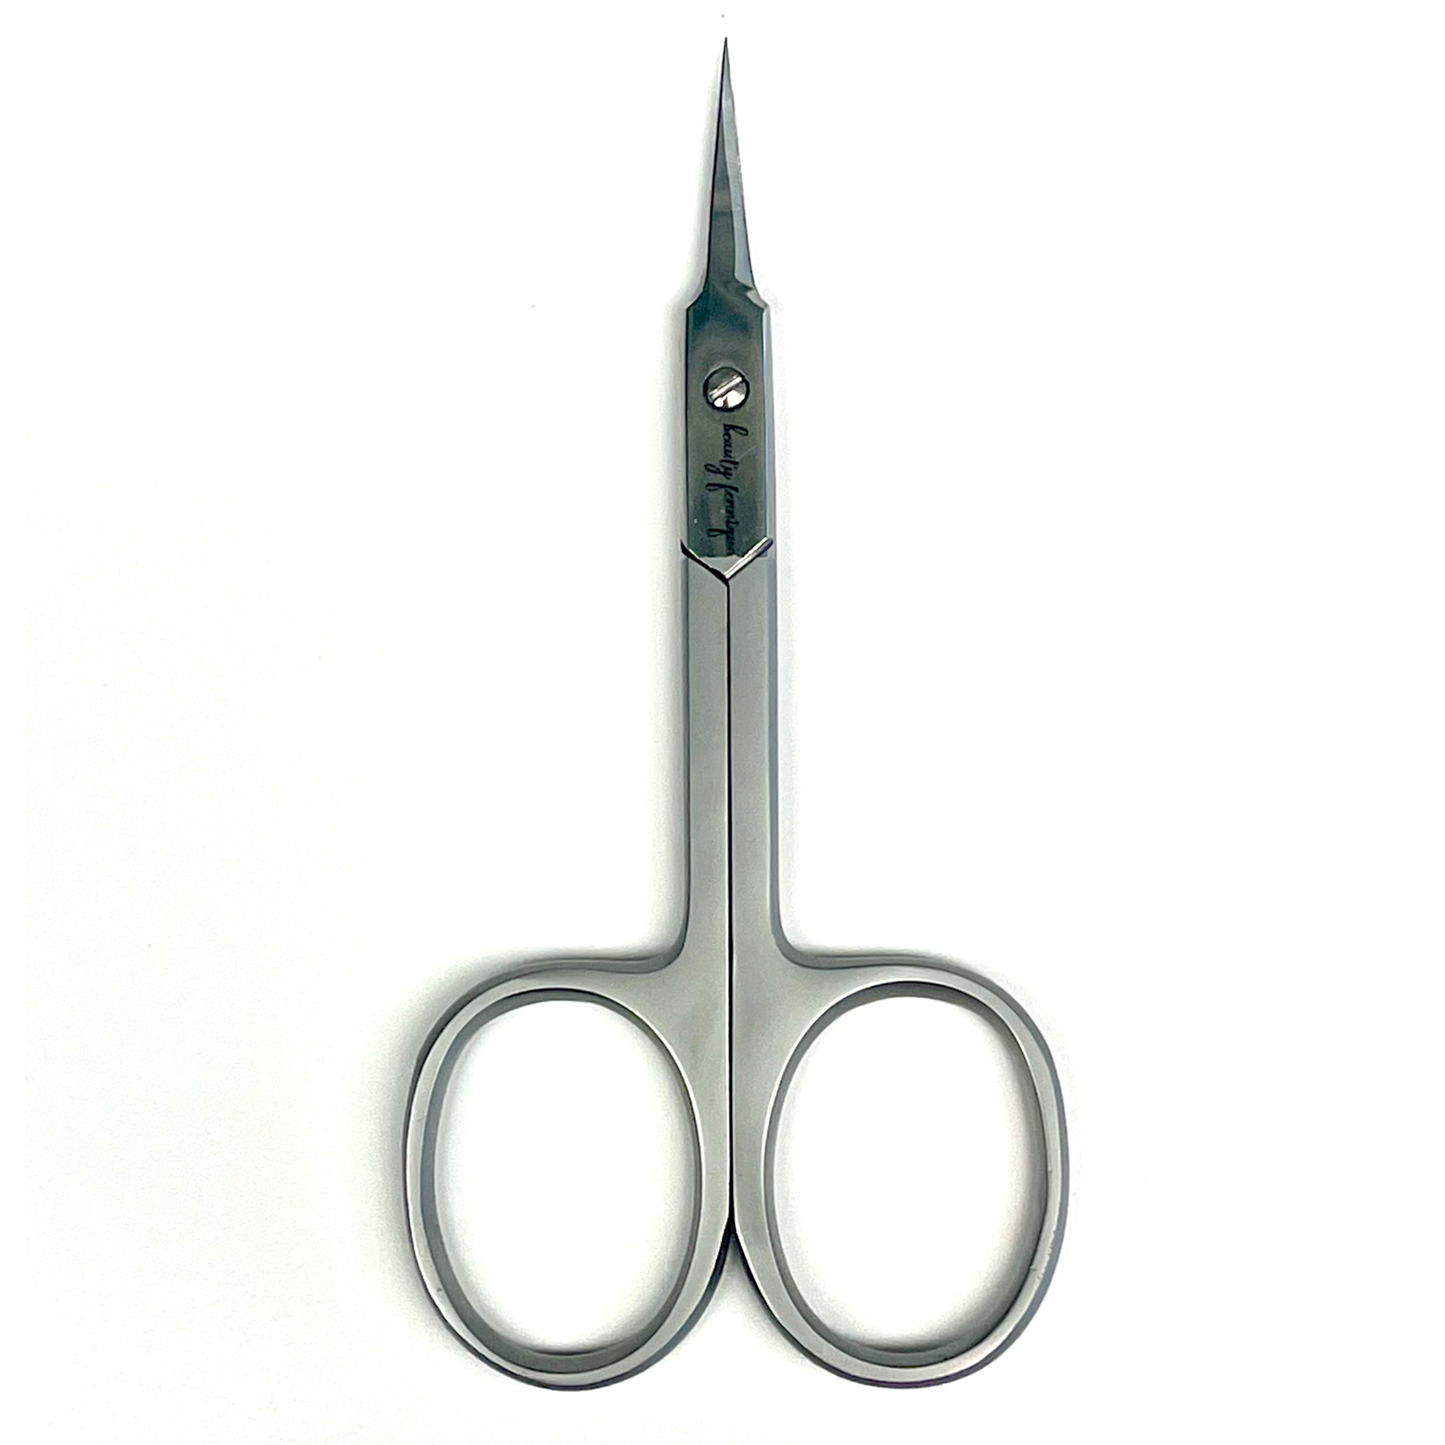 Global Fashion S-3 Cuticle Scissors - Buy Online in Moscow, Russia.